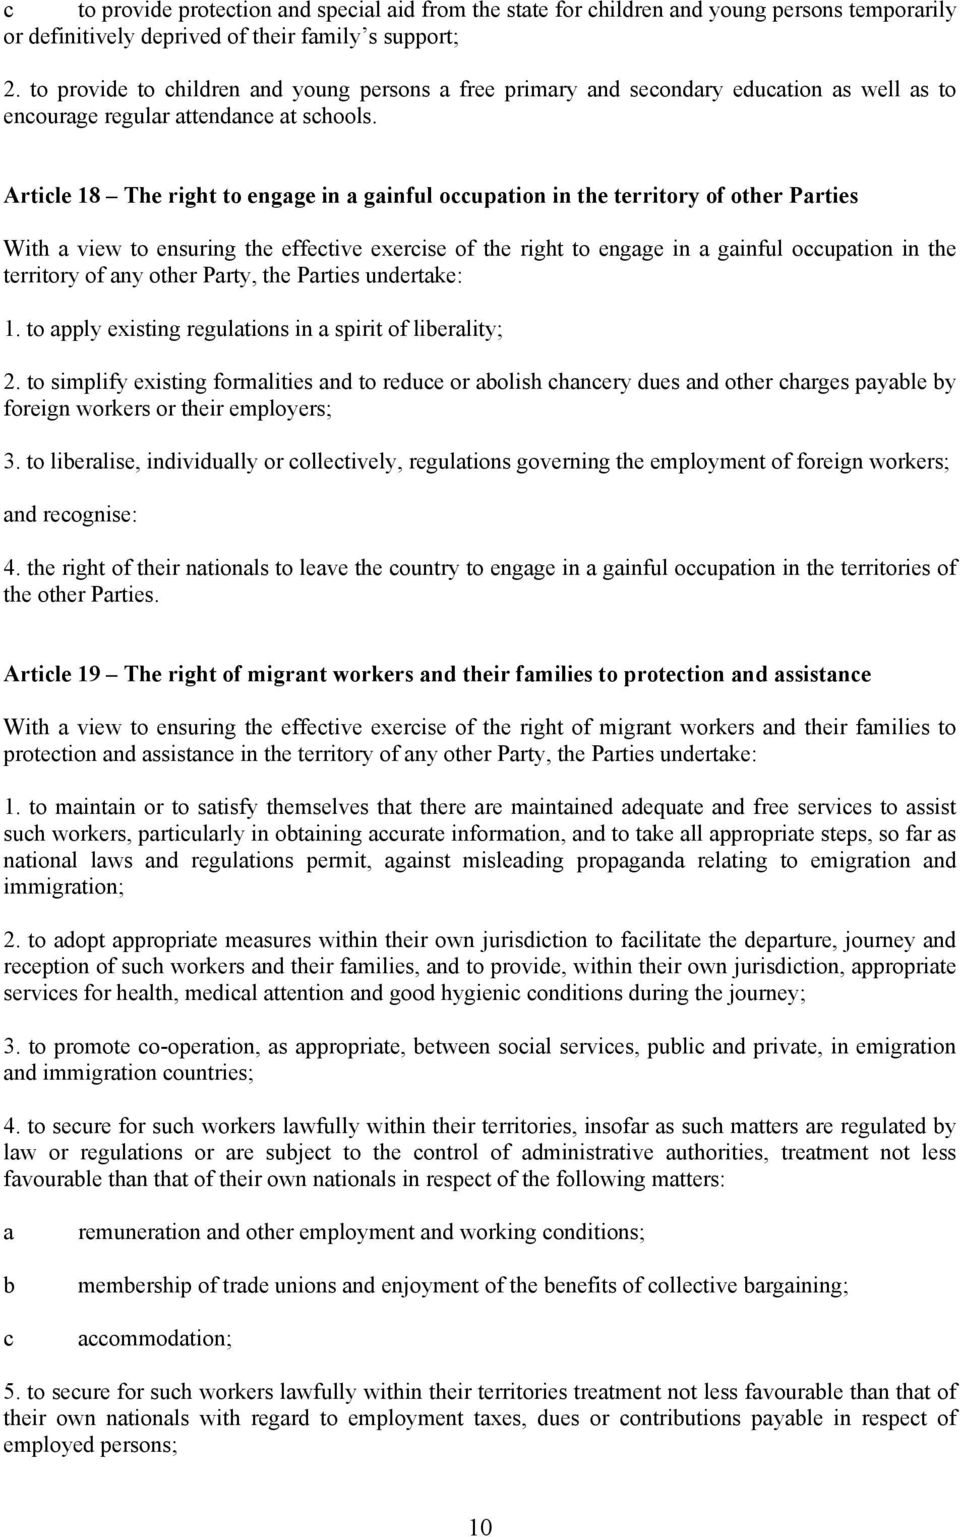 Article 18 The right to engage in a gainful occupation in the territory of other Parties With a view to ensuring the effective exercise of the right to engage in a gainful occupation in the territory